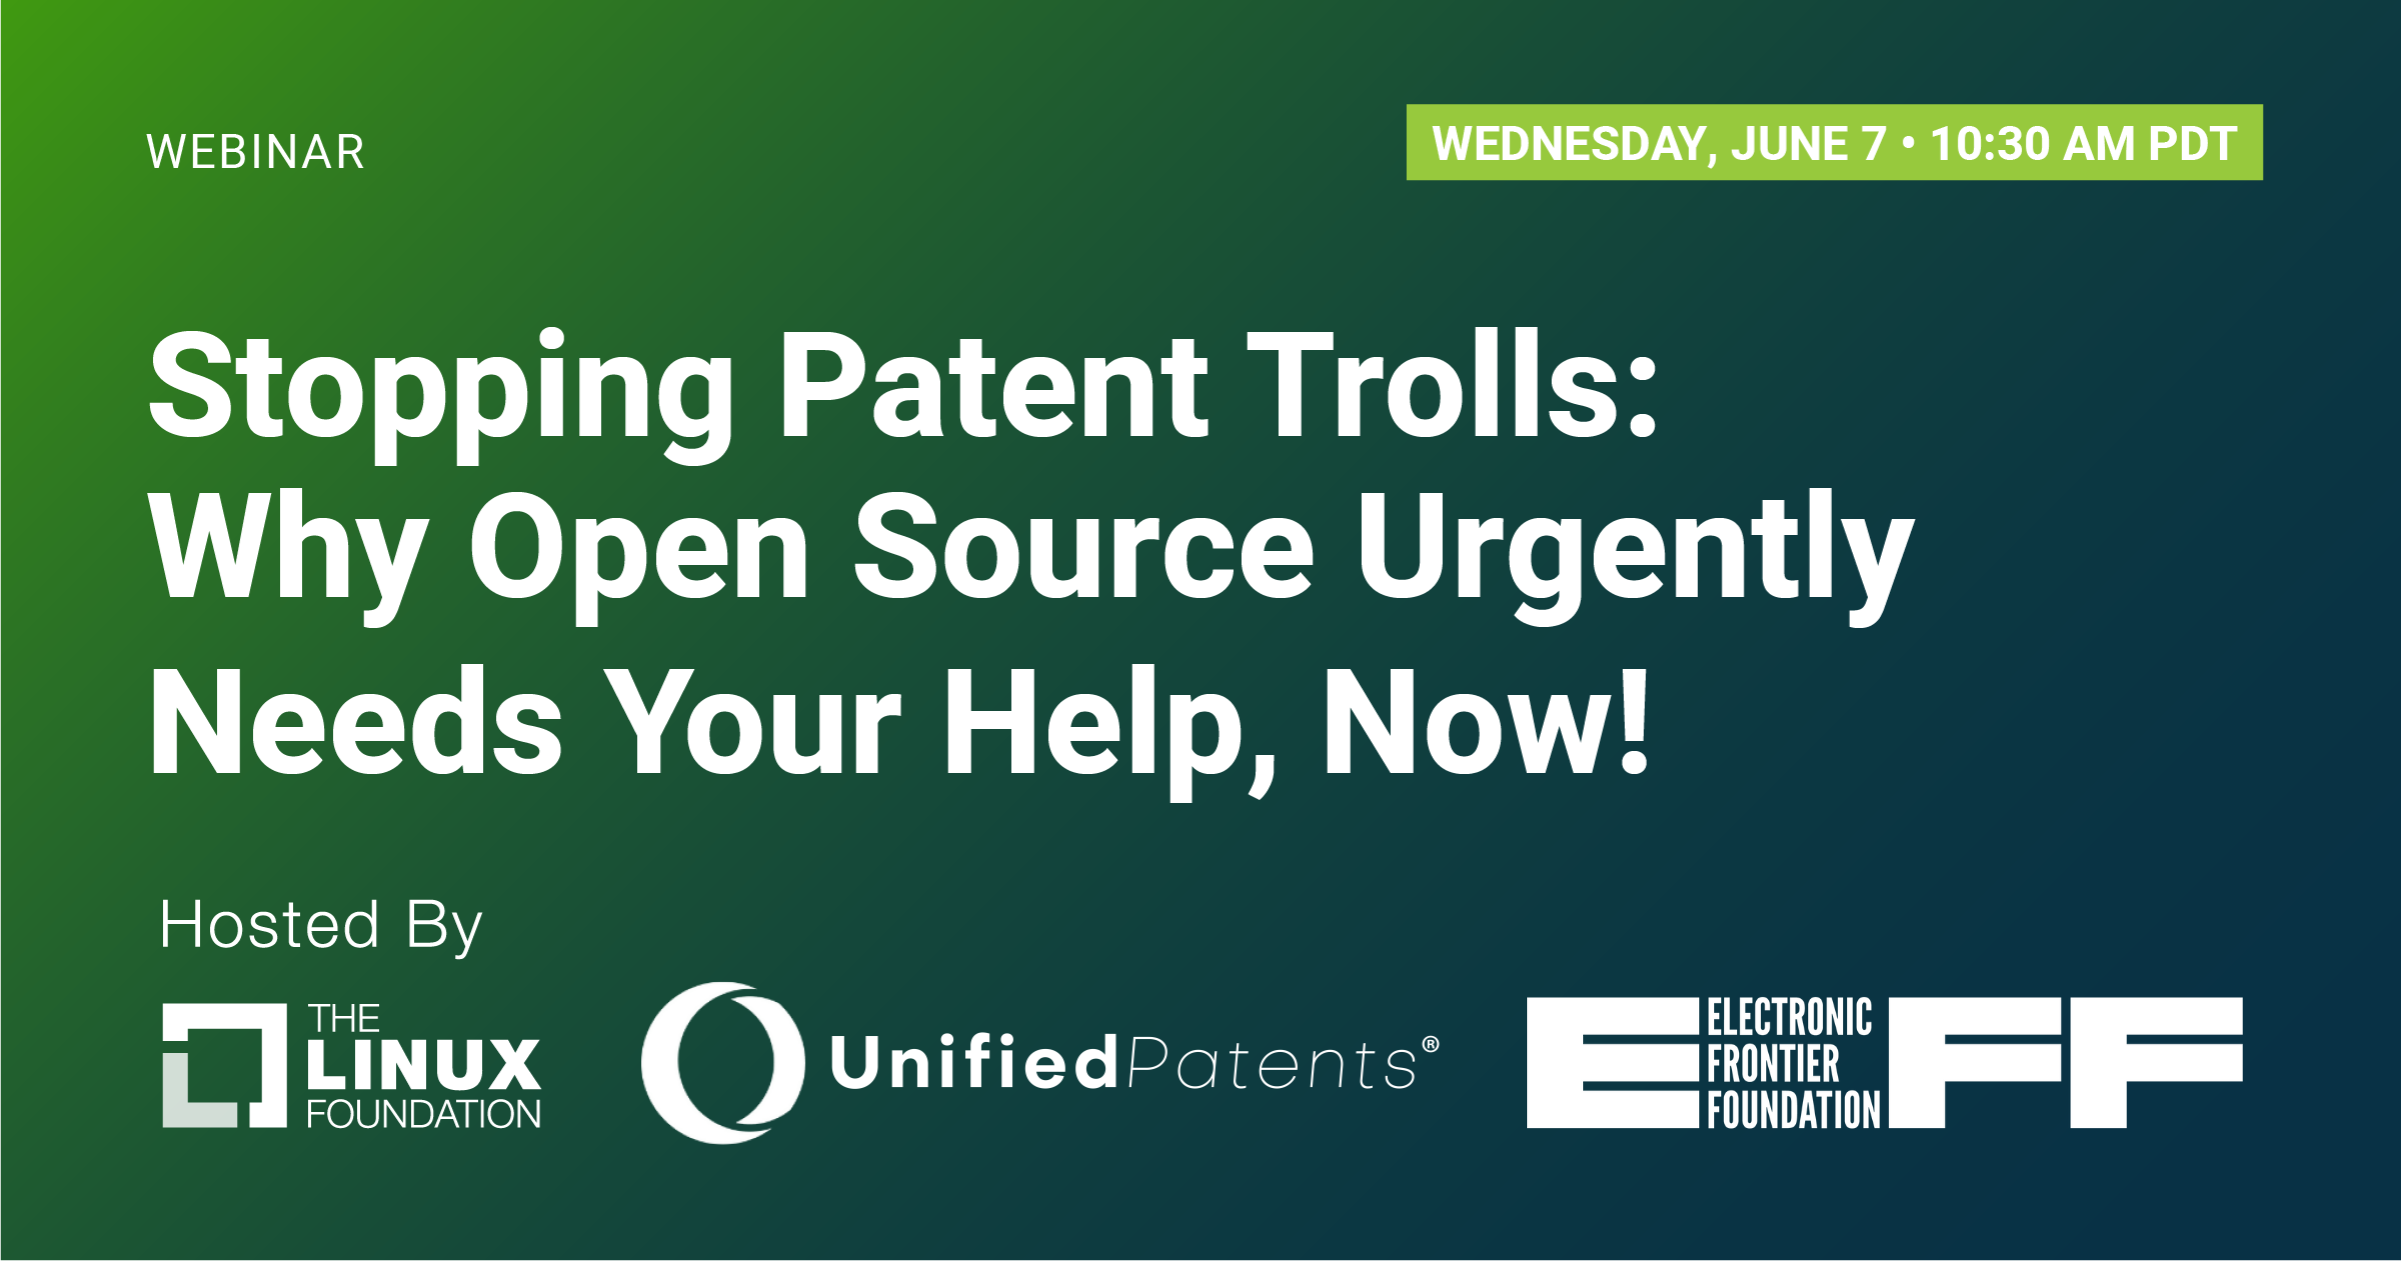 Stopping Patent Trolls: Why Open Source Urgently Needs Your Help, Now! featured image